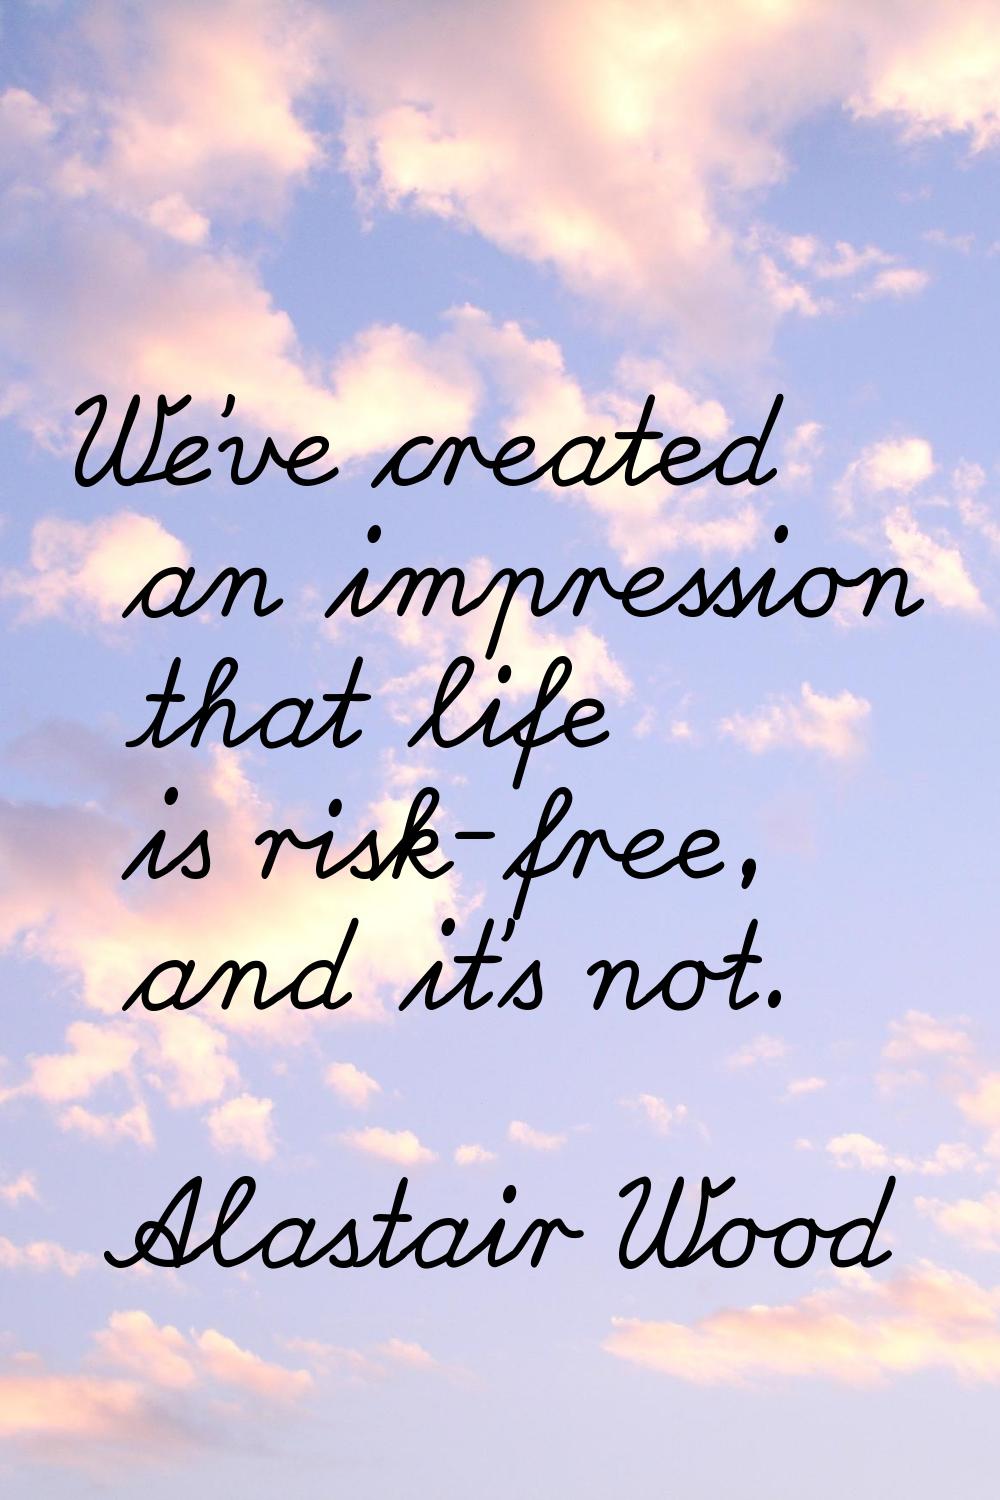 We've created an impression that life is risk-free, and it's not.